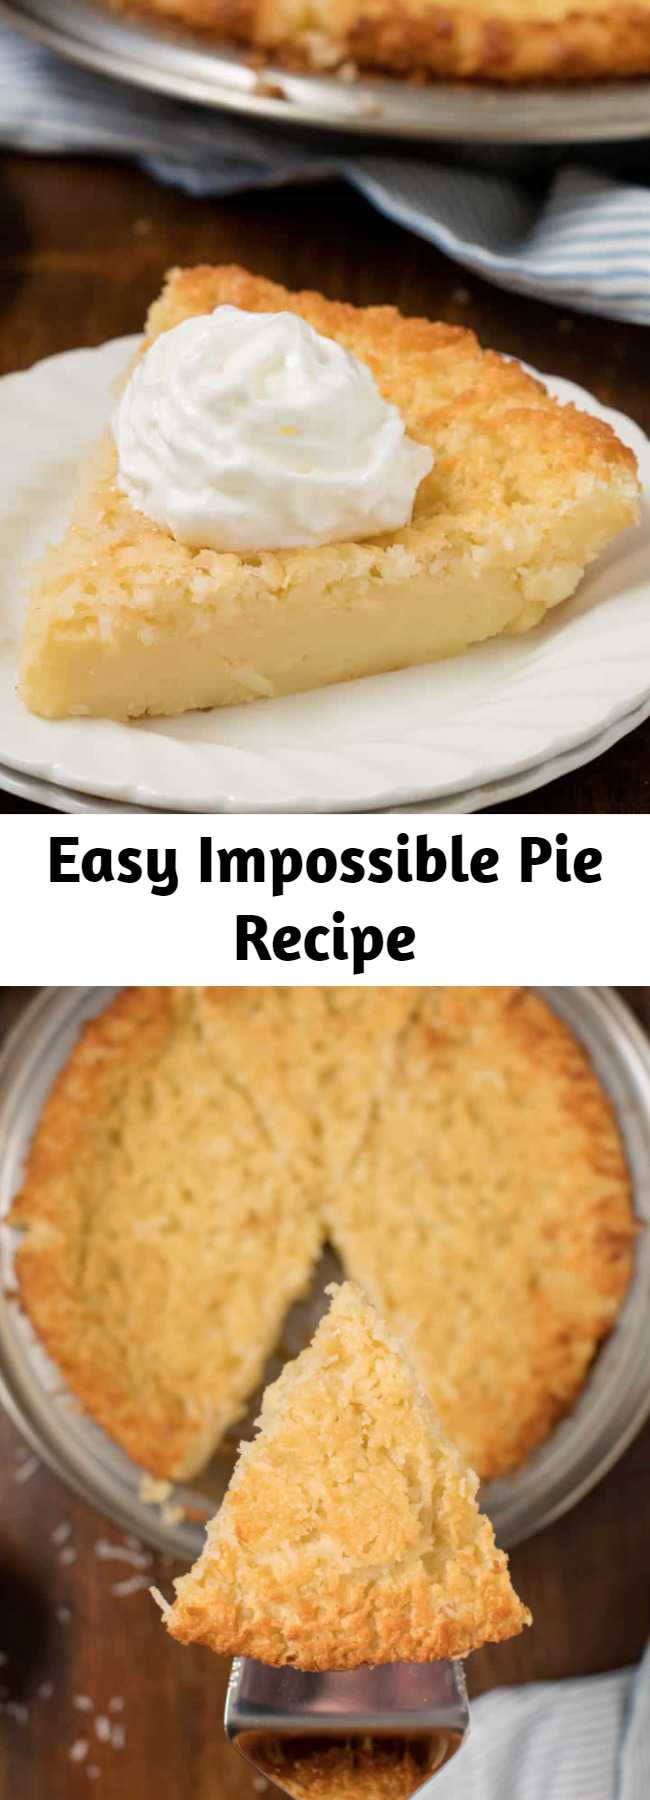 Easy Impossible Pie Recipe - The easiest pie you will ever bake! It magically forms its own crust plus two delicious layers while baking. This vintage pie has been around for a long time and I can see why. It’s easy to make and is scrumptious to eat! I think it has something to do with the fact that it bakes it’s own crust. All the ingredients are dumped into the plate and you let your oven work it’s magic to do the “impossible”. It comes out with three delicious layers!